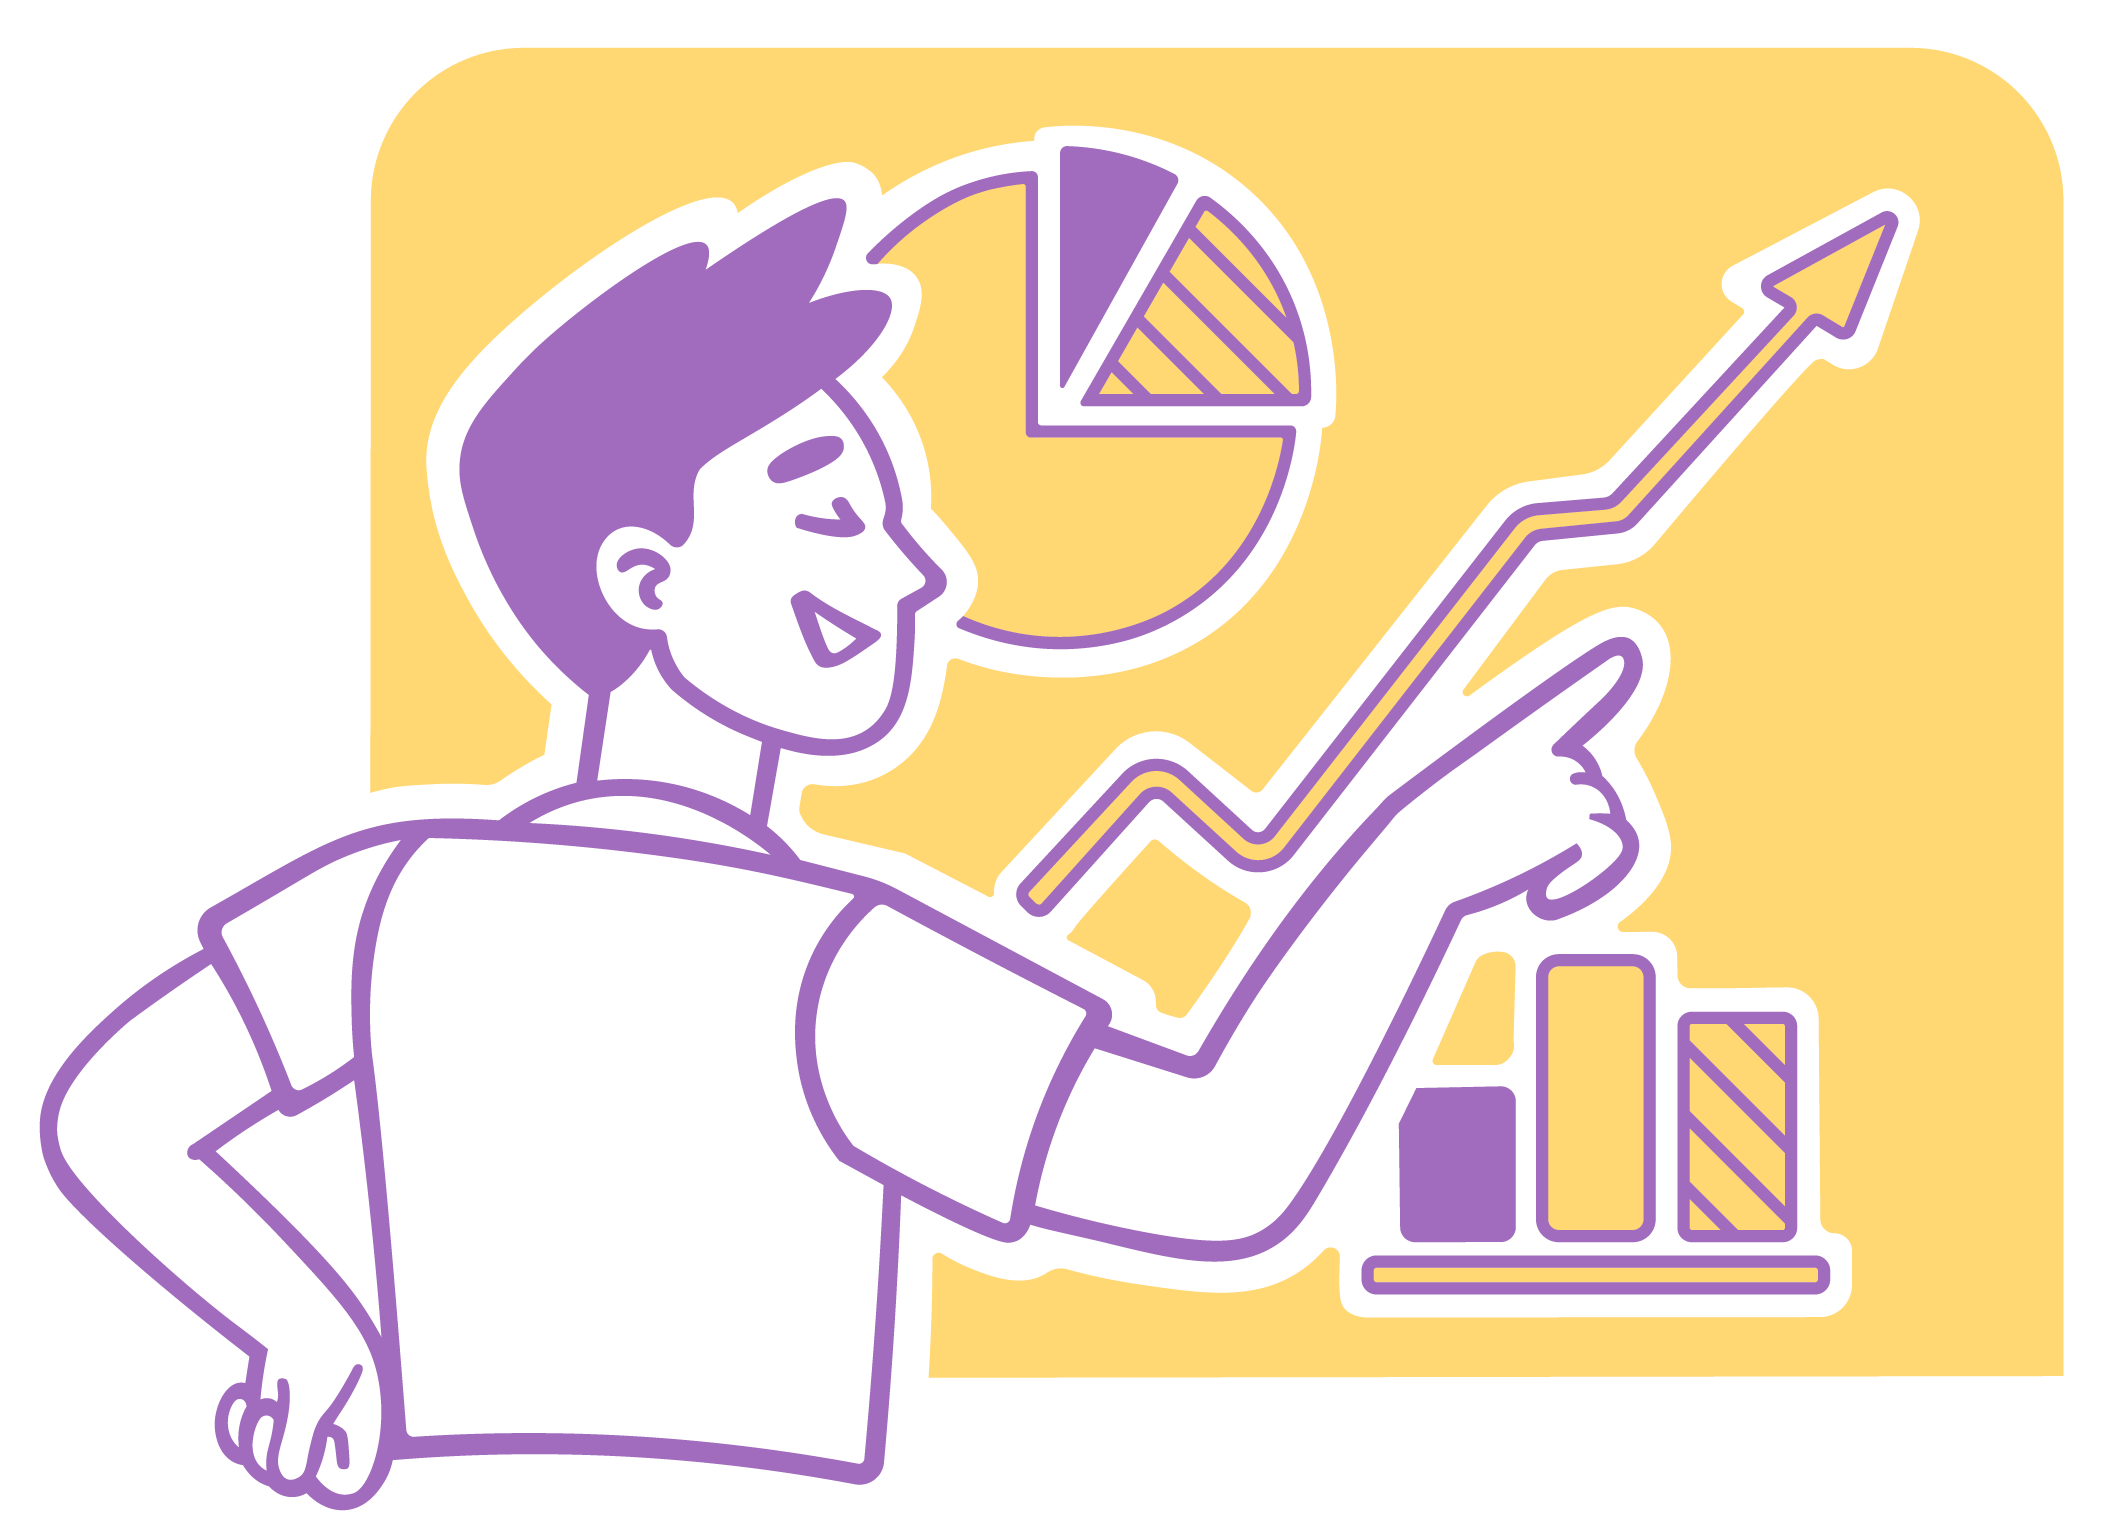 A man pointing at a graph to measure success and thinking "Infographic marketing uses the power of imagery to tell a brand story or convey a message."